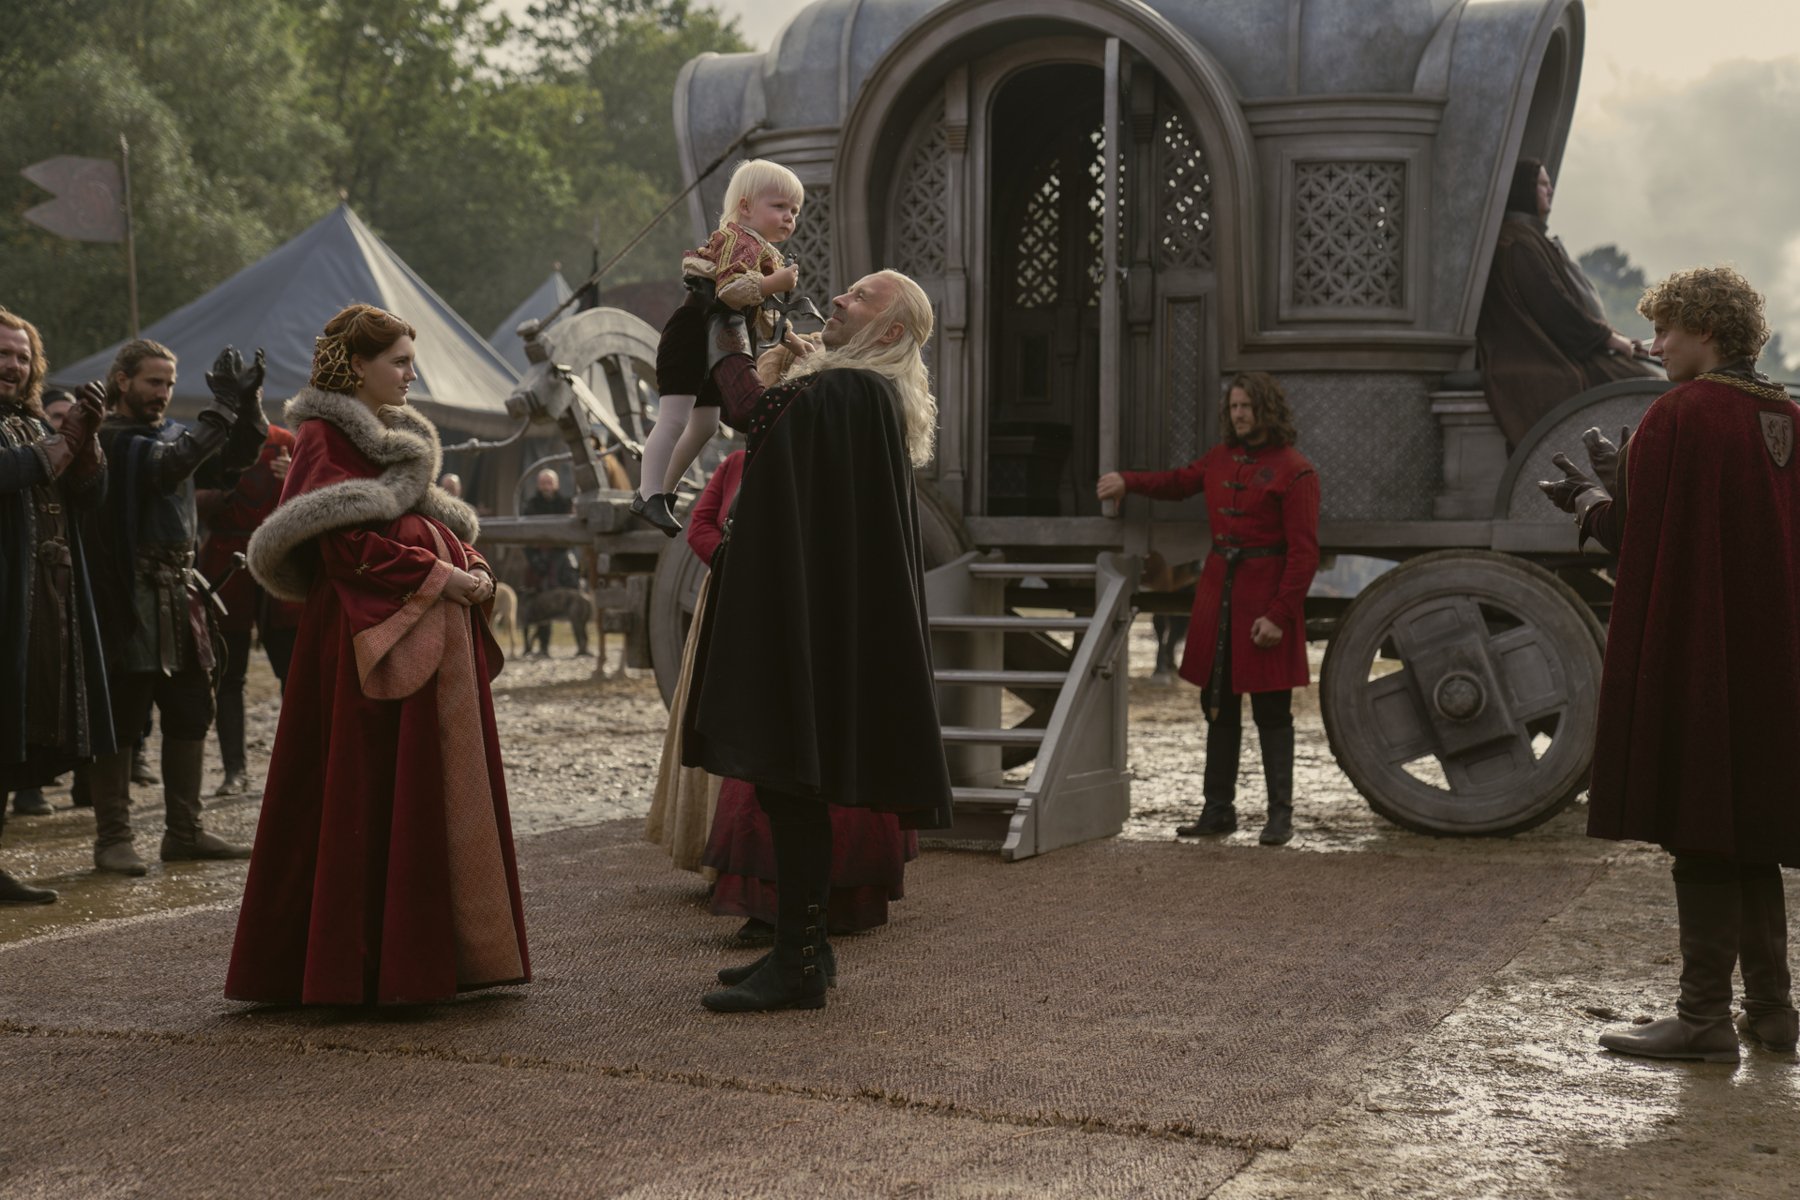 Emily Carey as Alicent Hightower and Paddy Considine as King Viserys. They stand in front of a carriage and Viserys holds up her child. His son might pose a problem for Rhaenyra on the way to Episode 4 of The House of the Dragon.